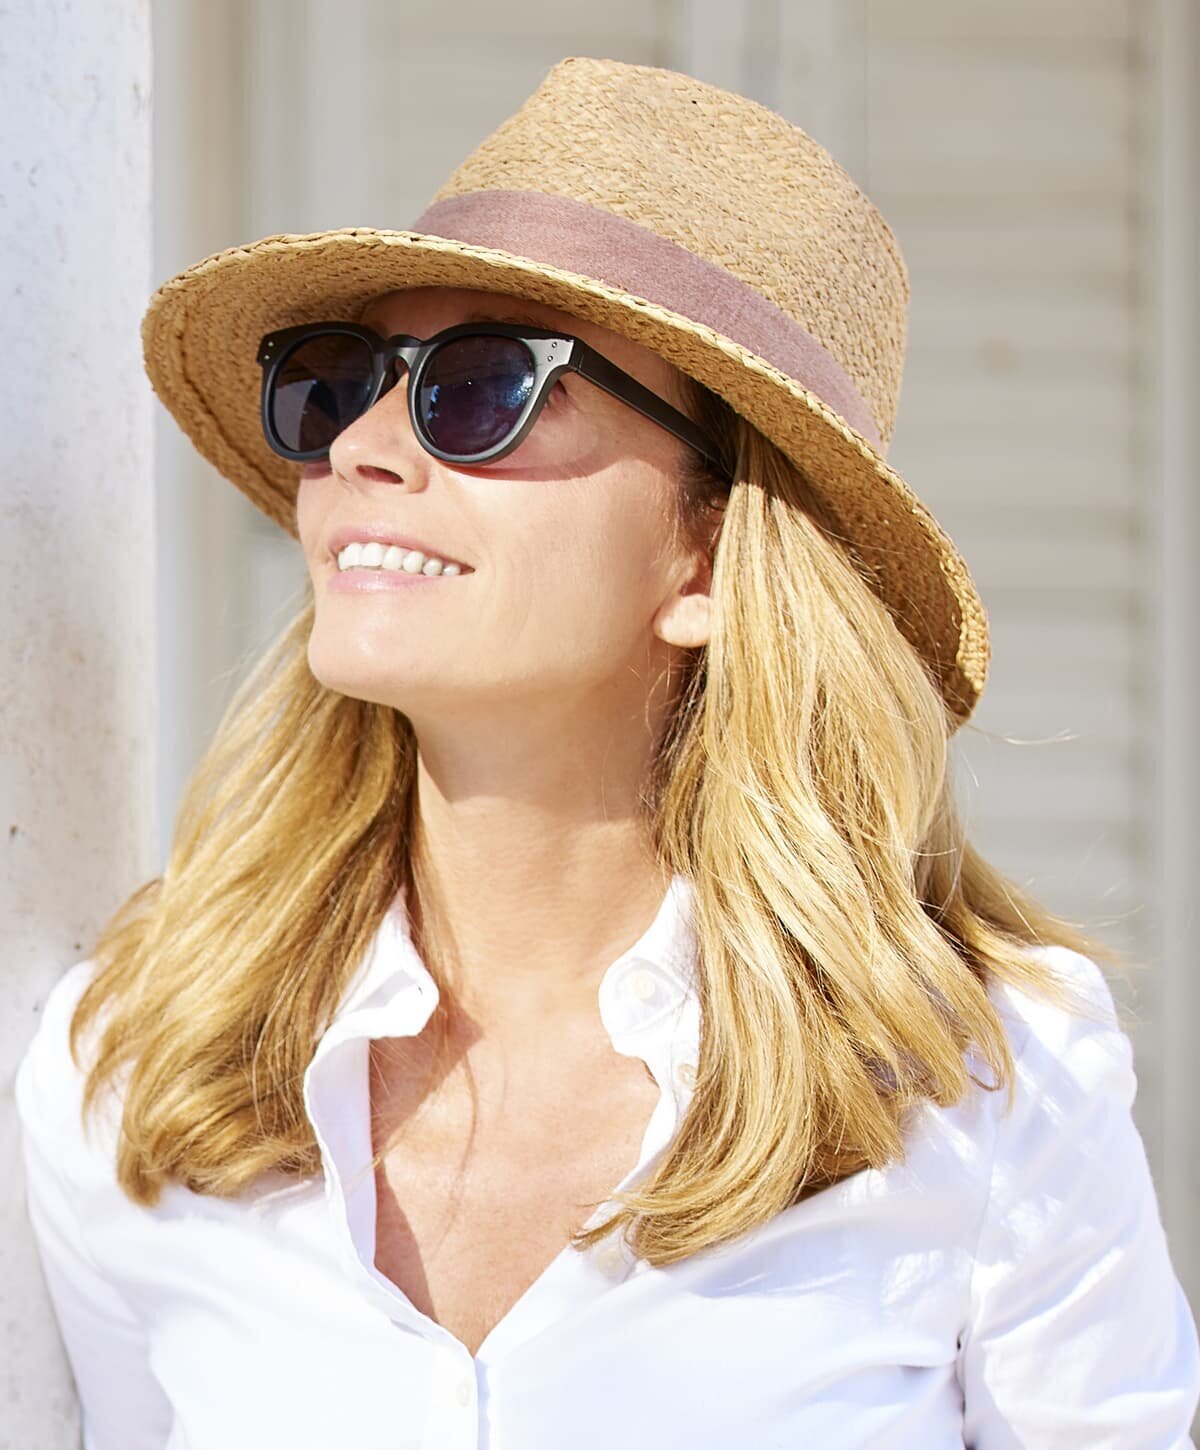 Age Spots Treatment patient model wearing a sunhat and white shirt